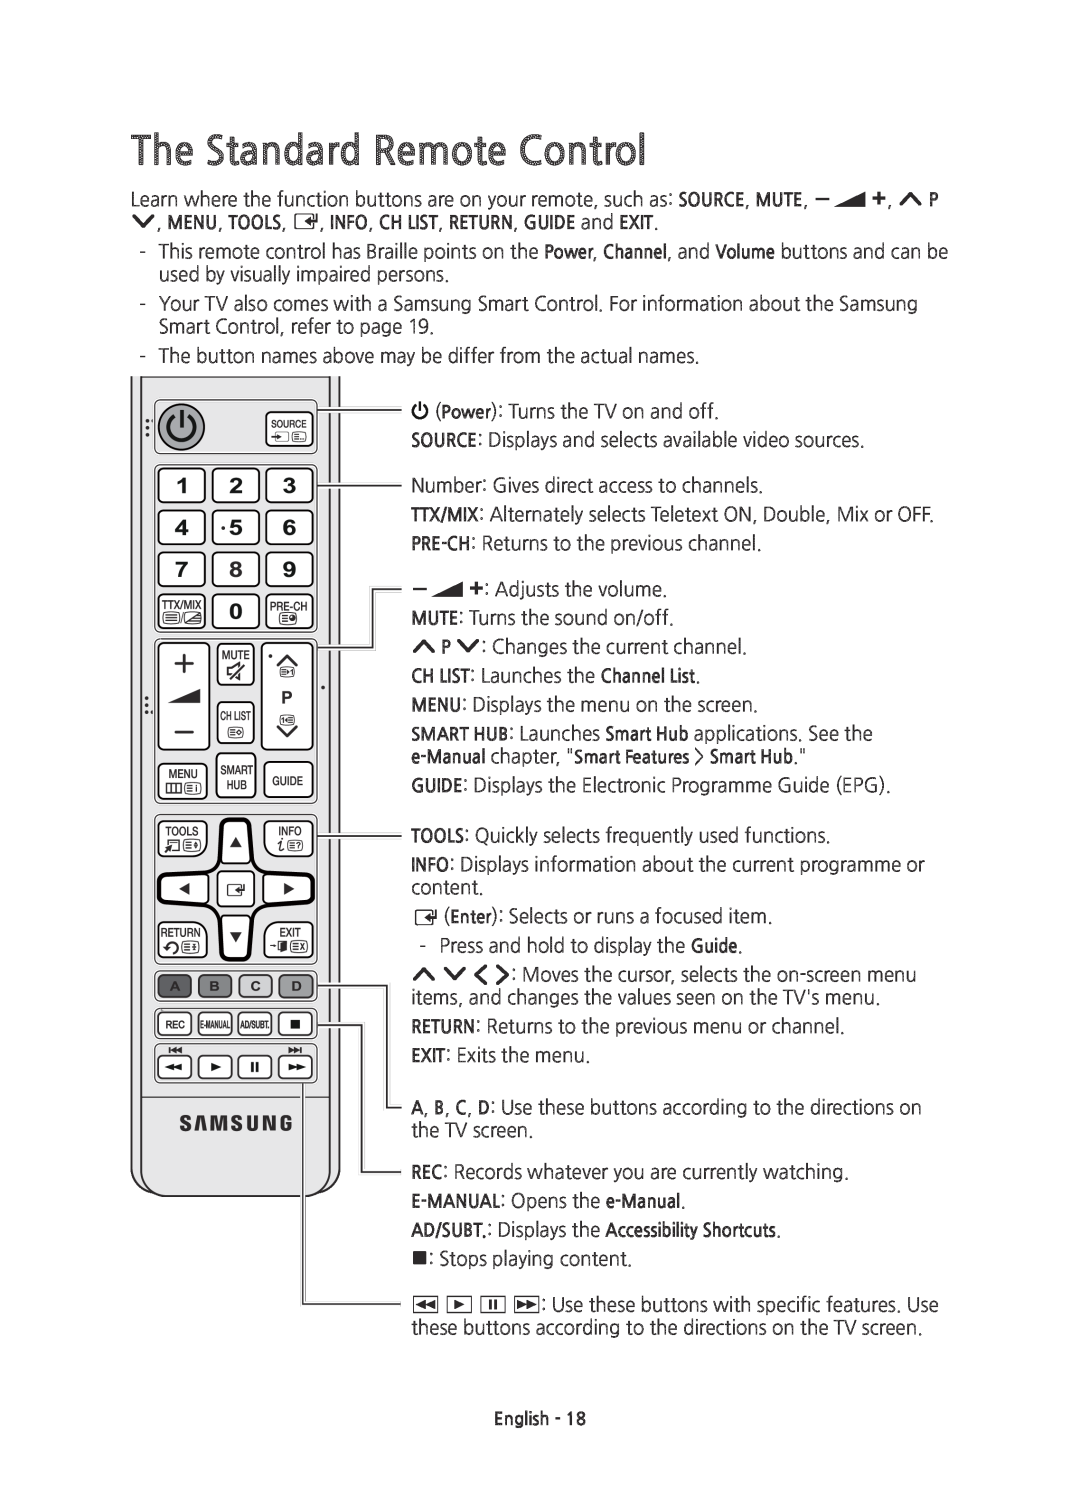 Samsung UE78JS9500TXXC manual The Standard Remote Control, CH LIST Launches the Channel List, E-MANUAL Opens the e-Manual 